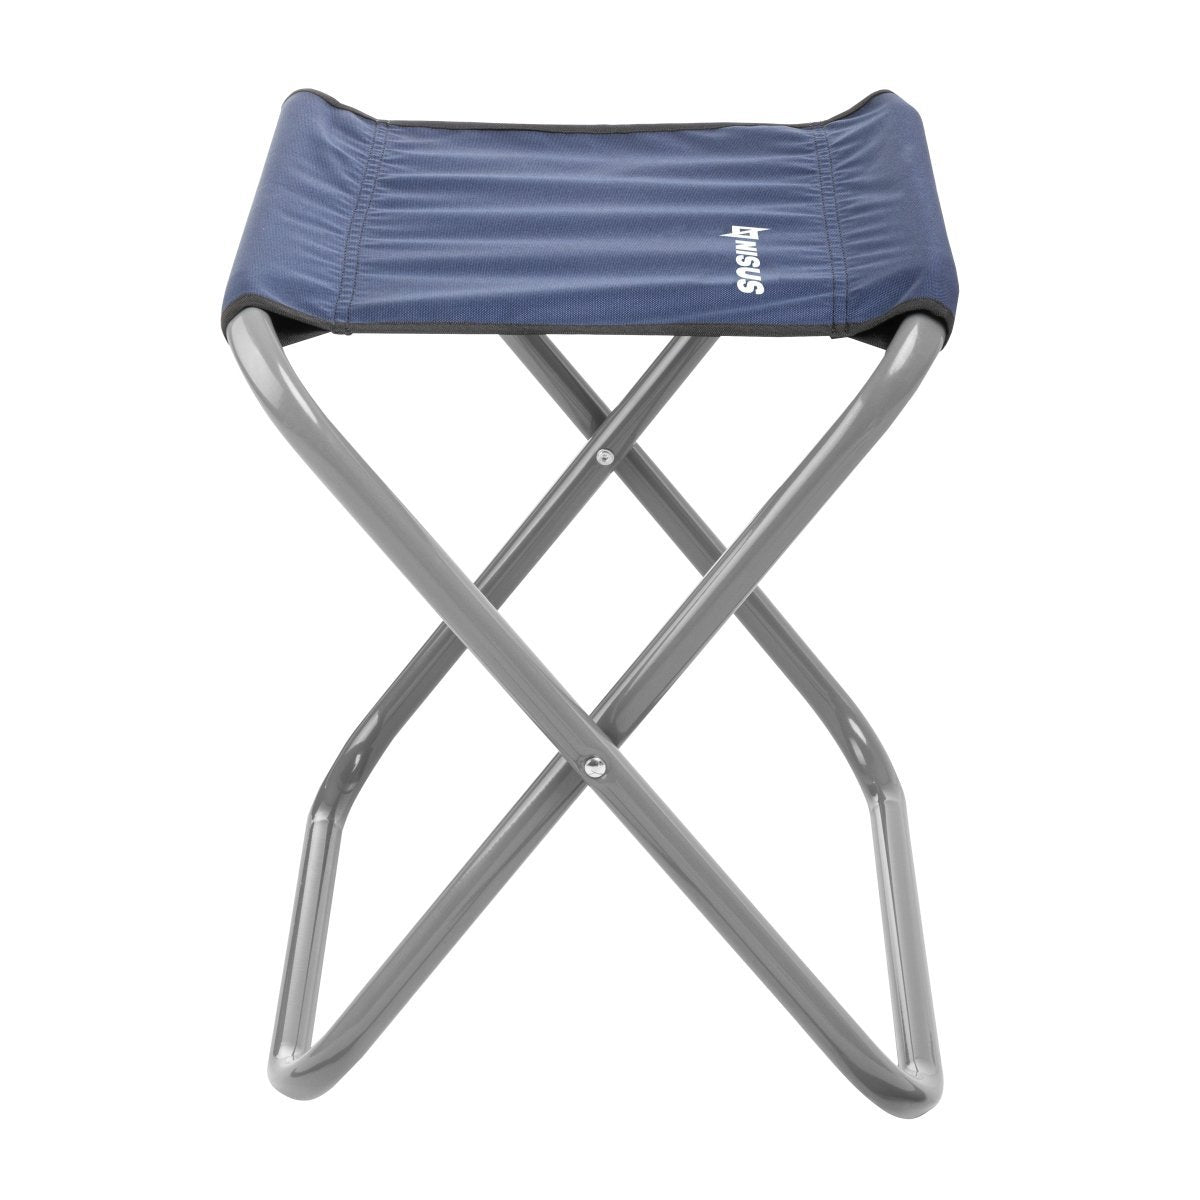 Set of 2 Blue Folding Camping Chairs with Steel Frame